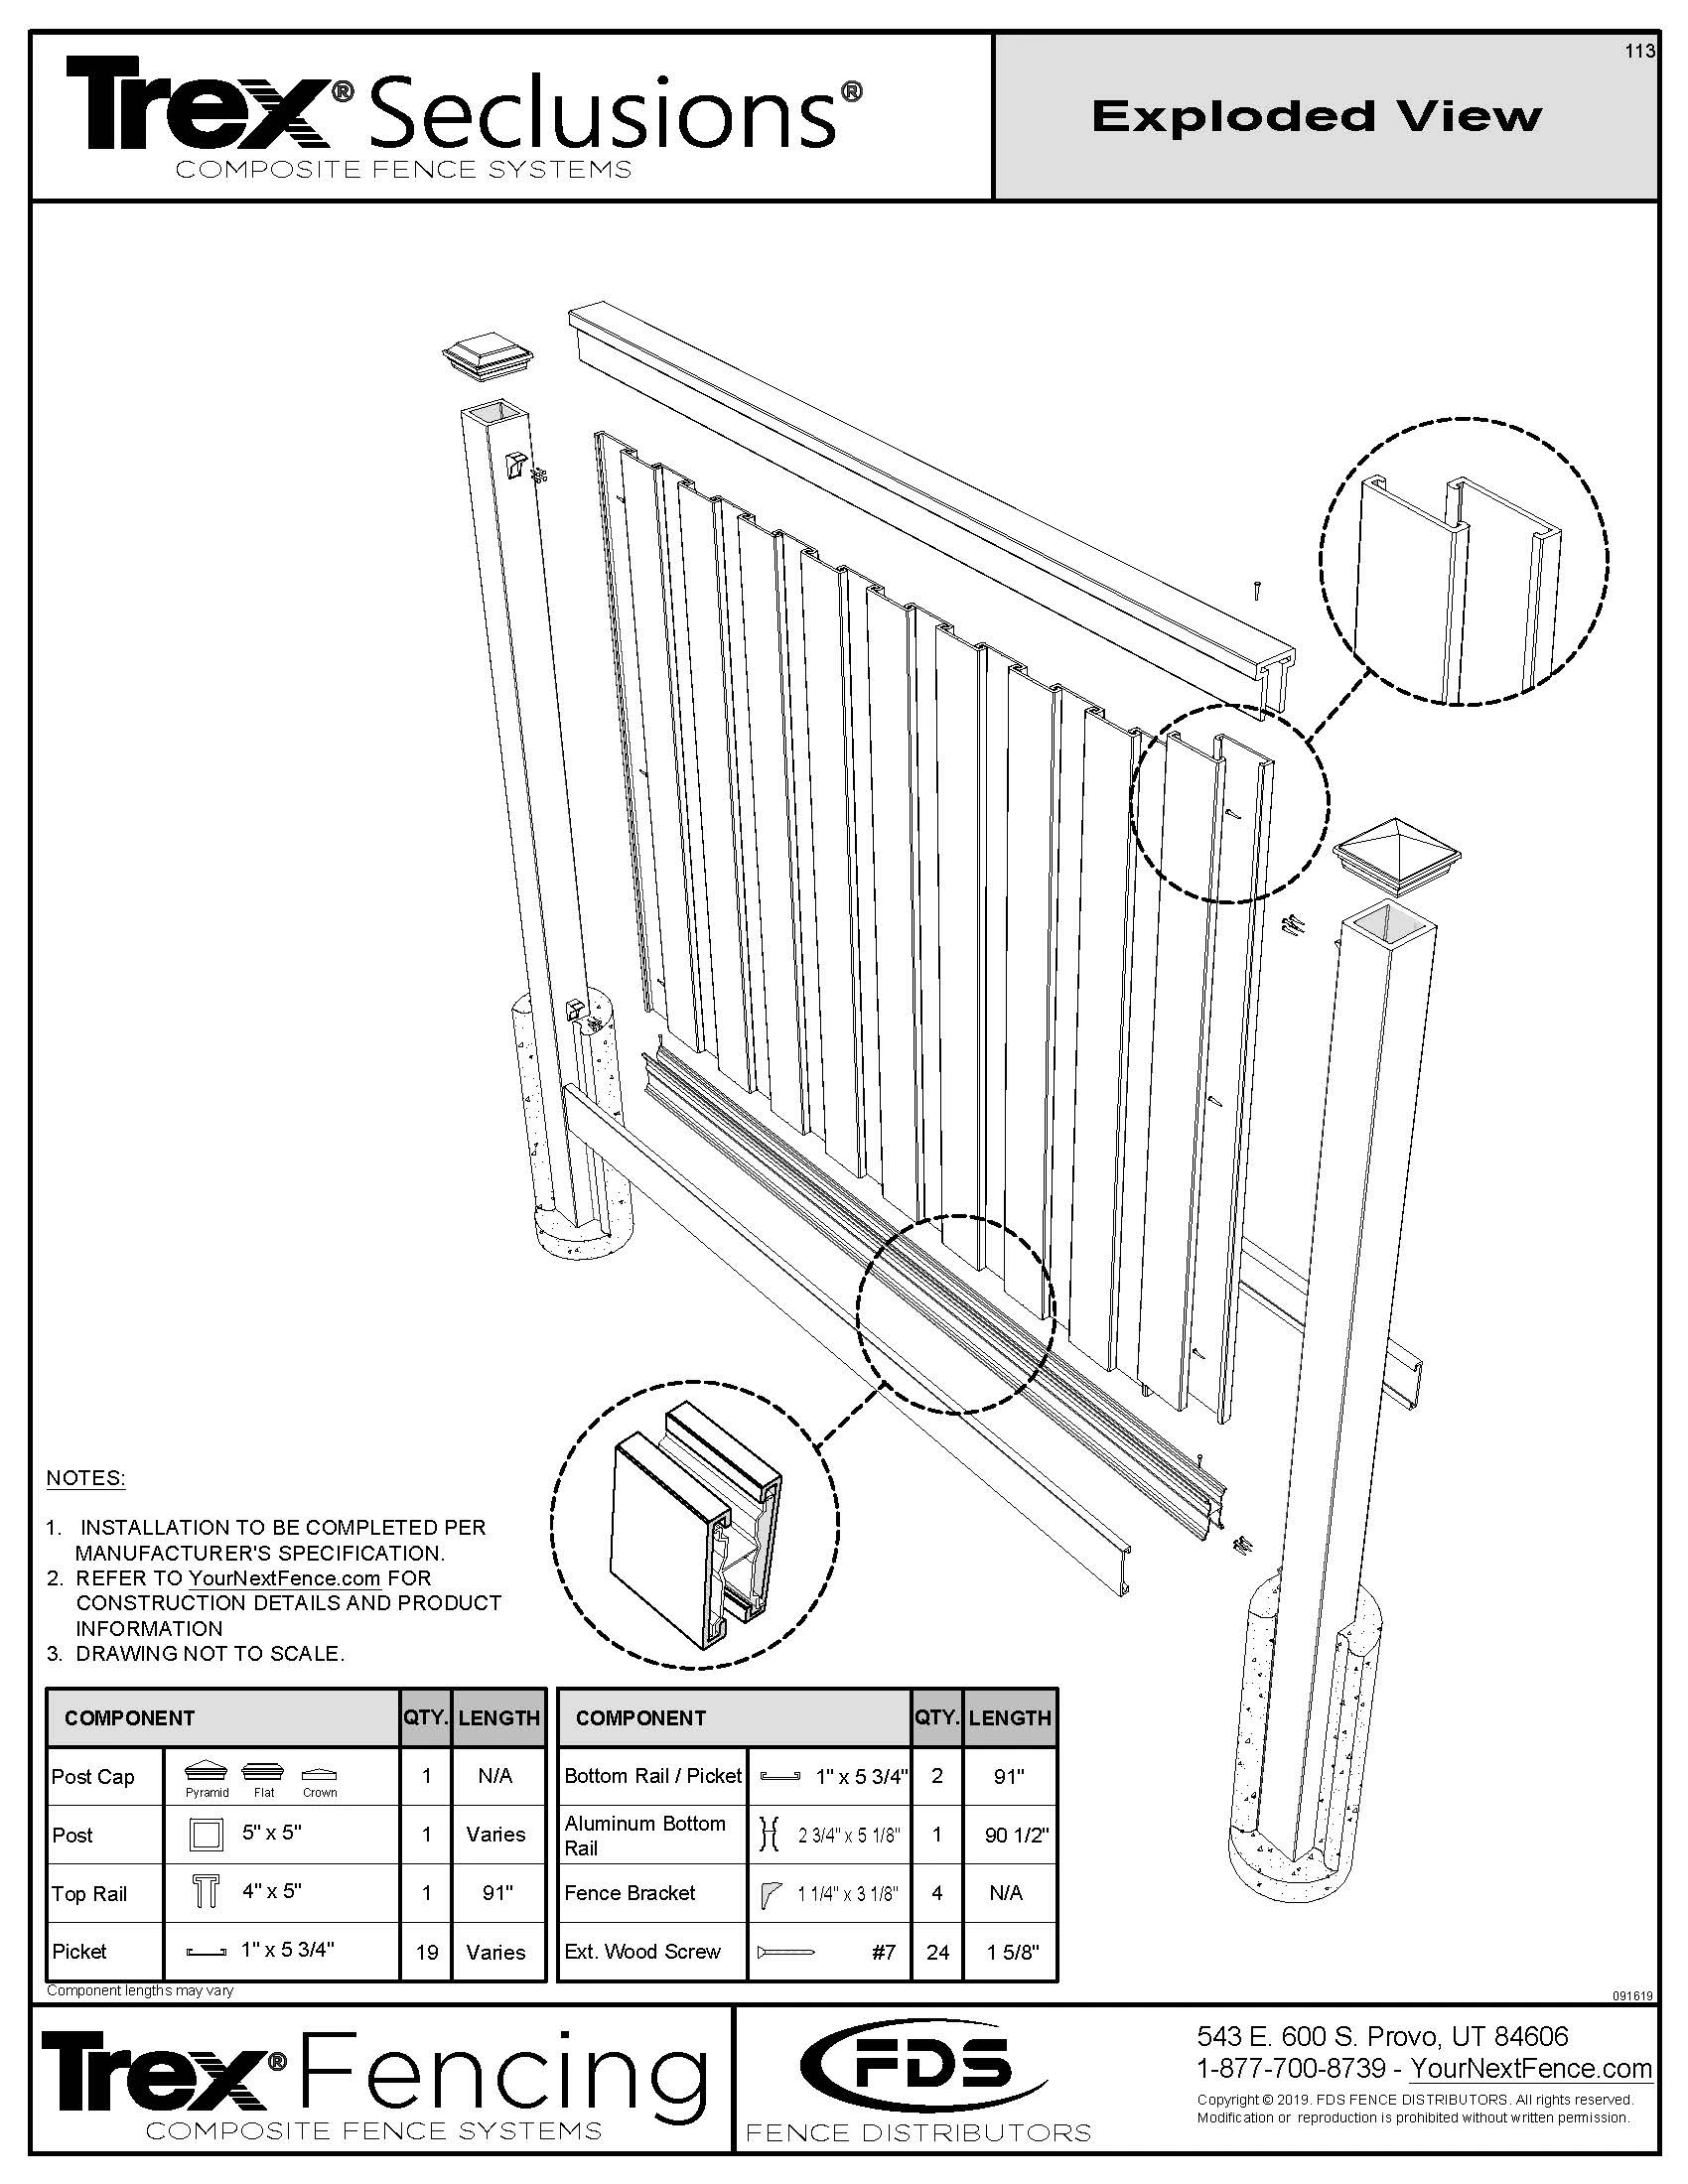 Trex Seclusions Fence Panel Kit - 8-ft. Tall 8